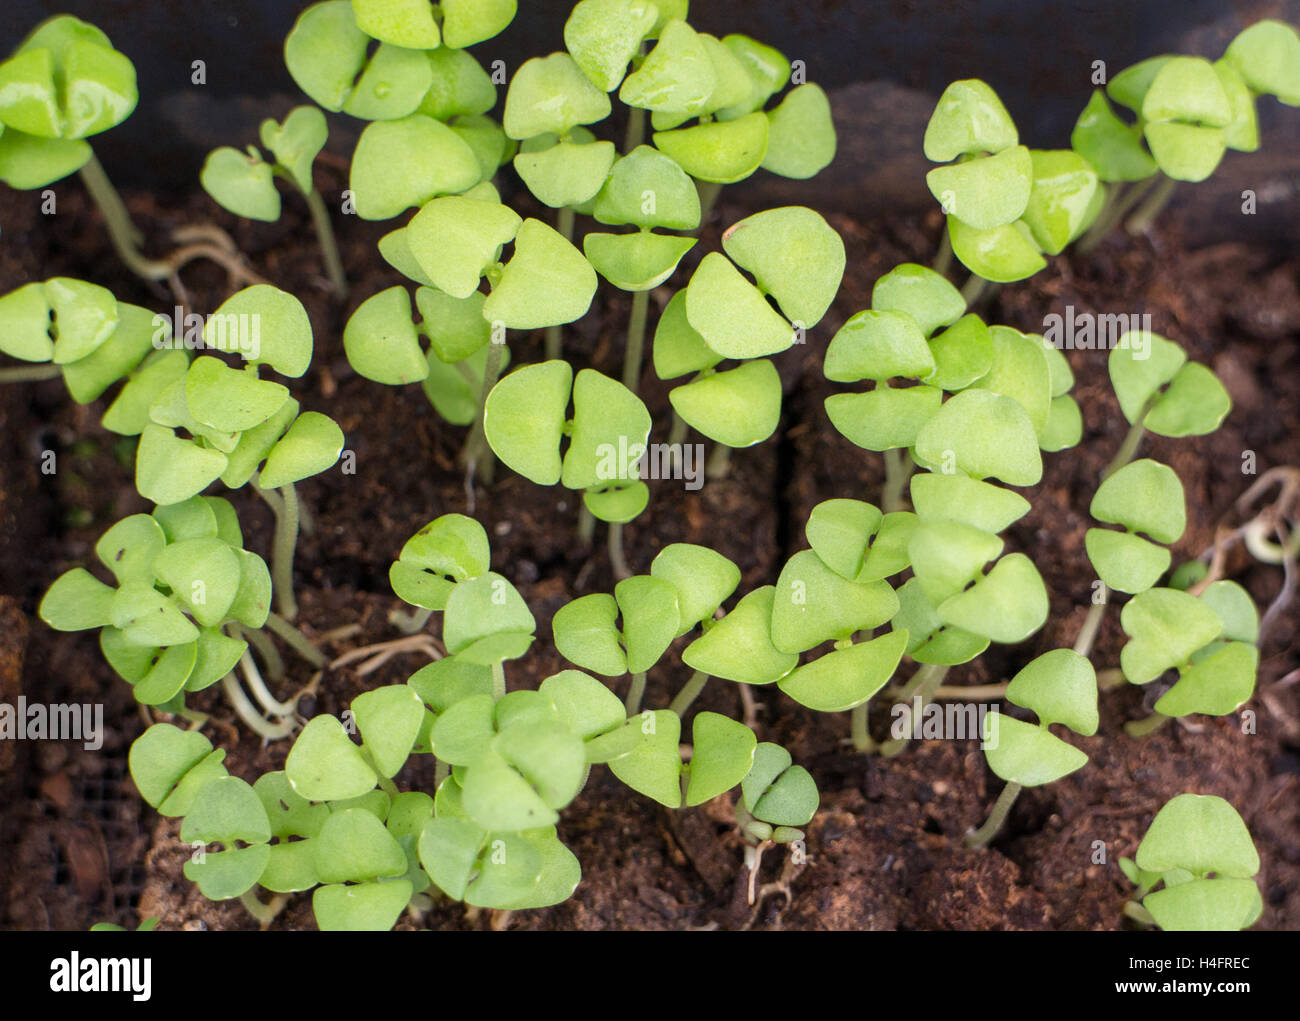 Baby basil growing to be transplanted in cells, farm inspired Stock Photo